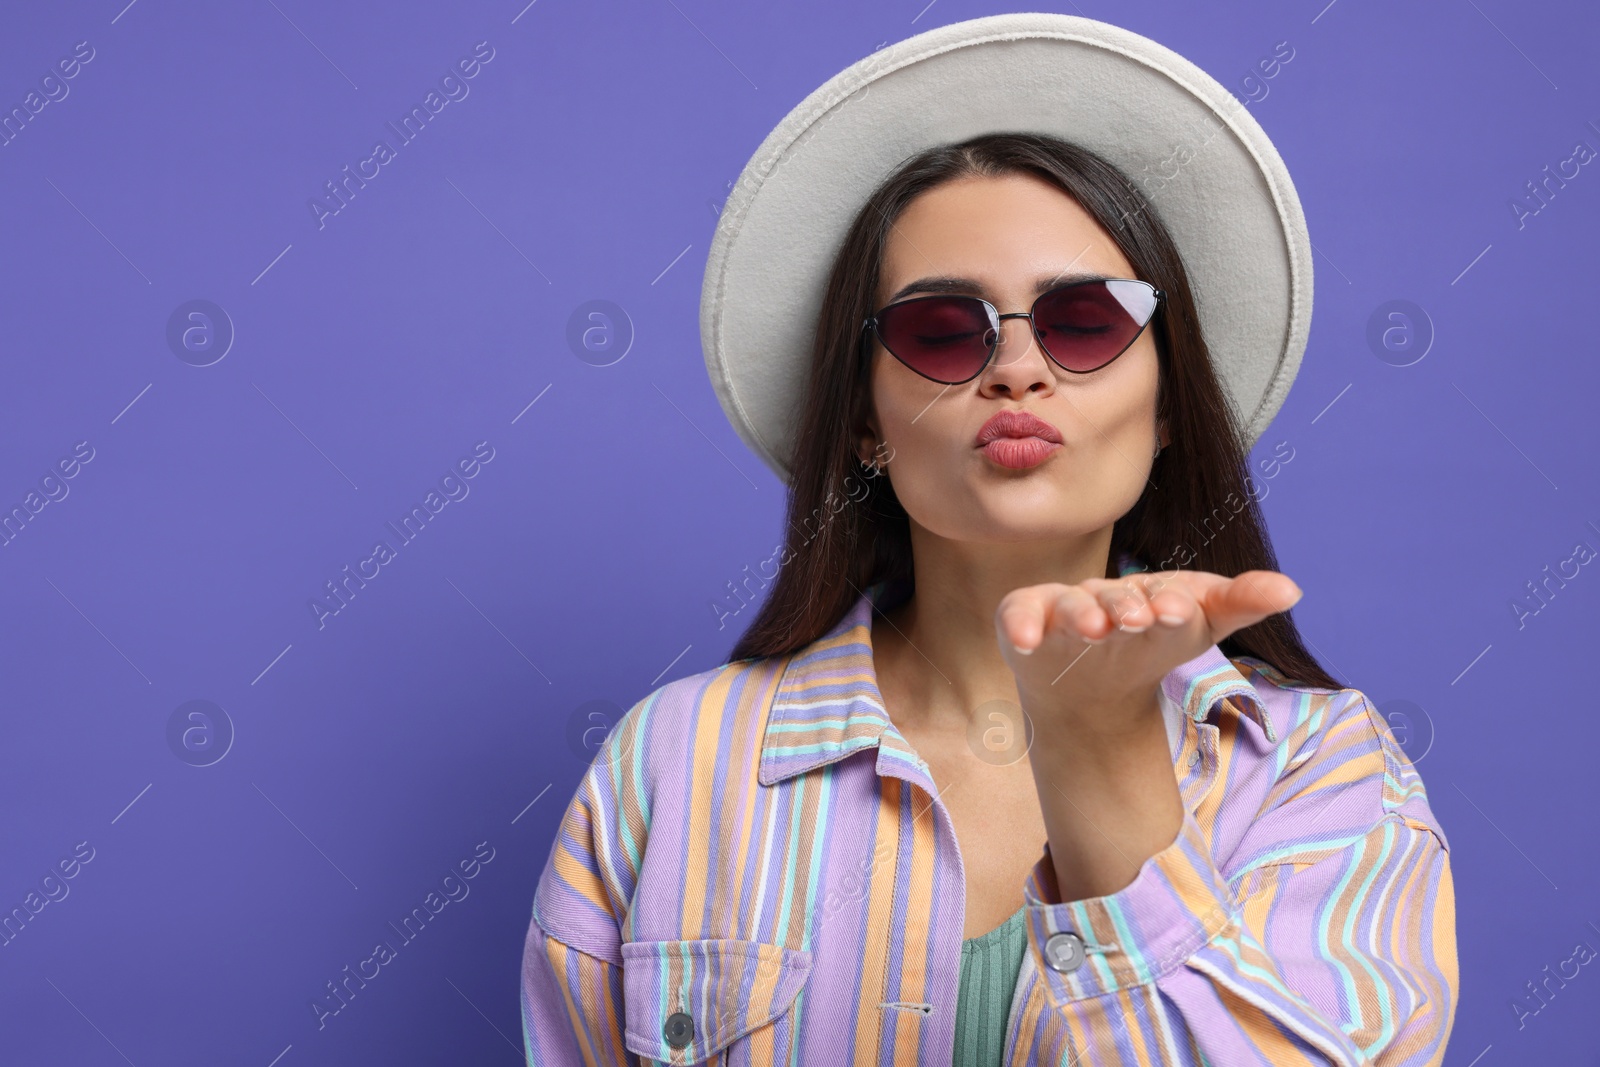 Photo of Beautiful young woman with stylish hat blowing kiss on purple background. Space for text